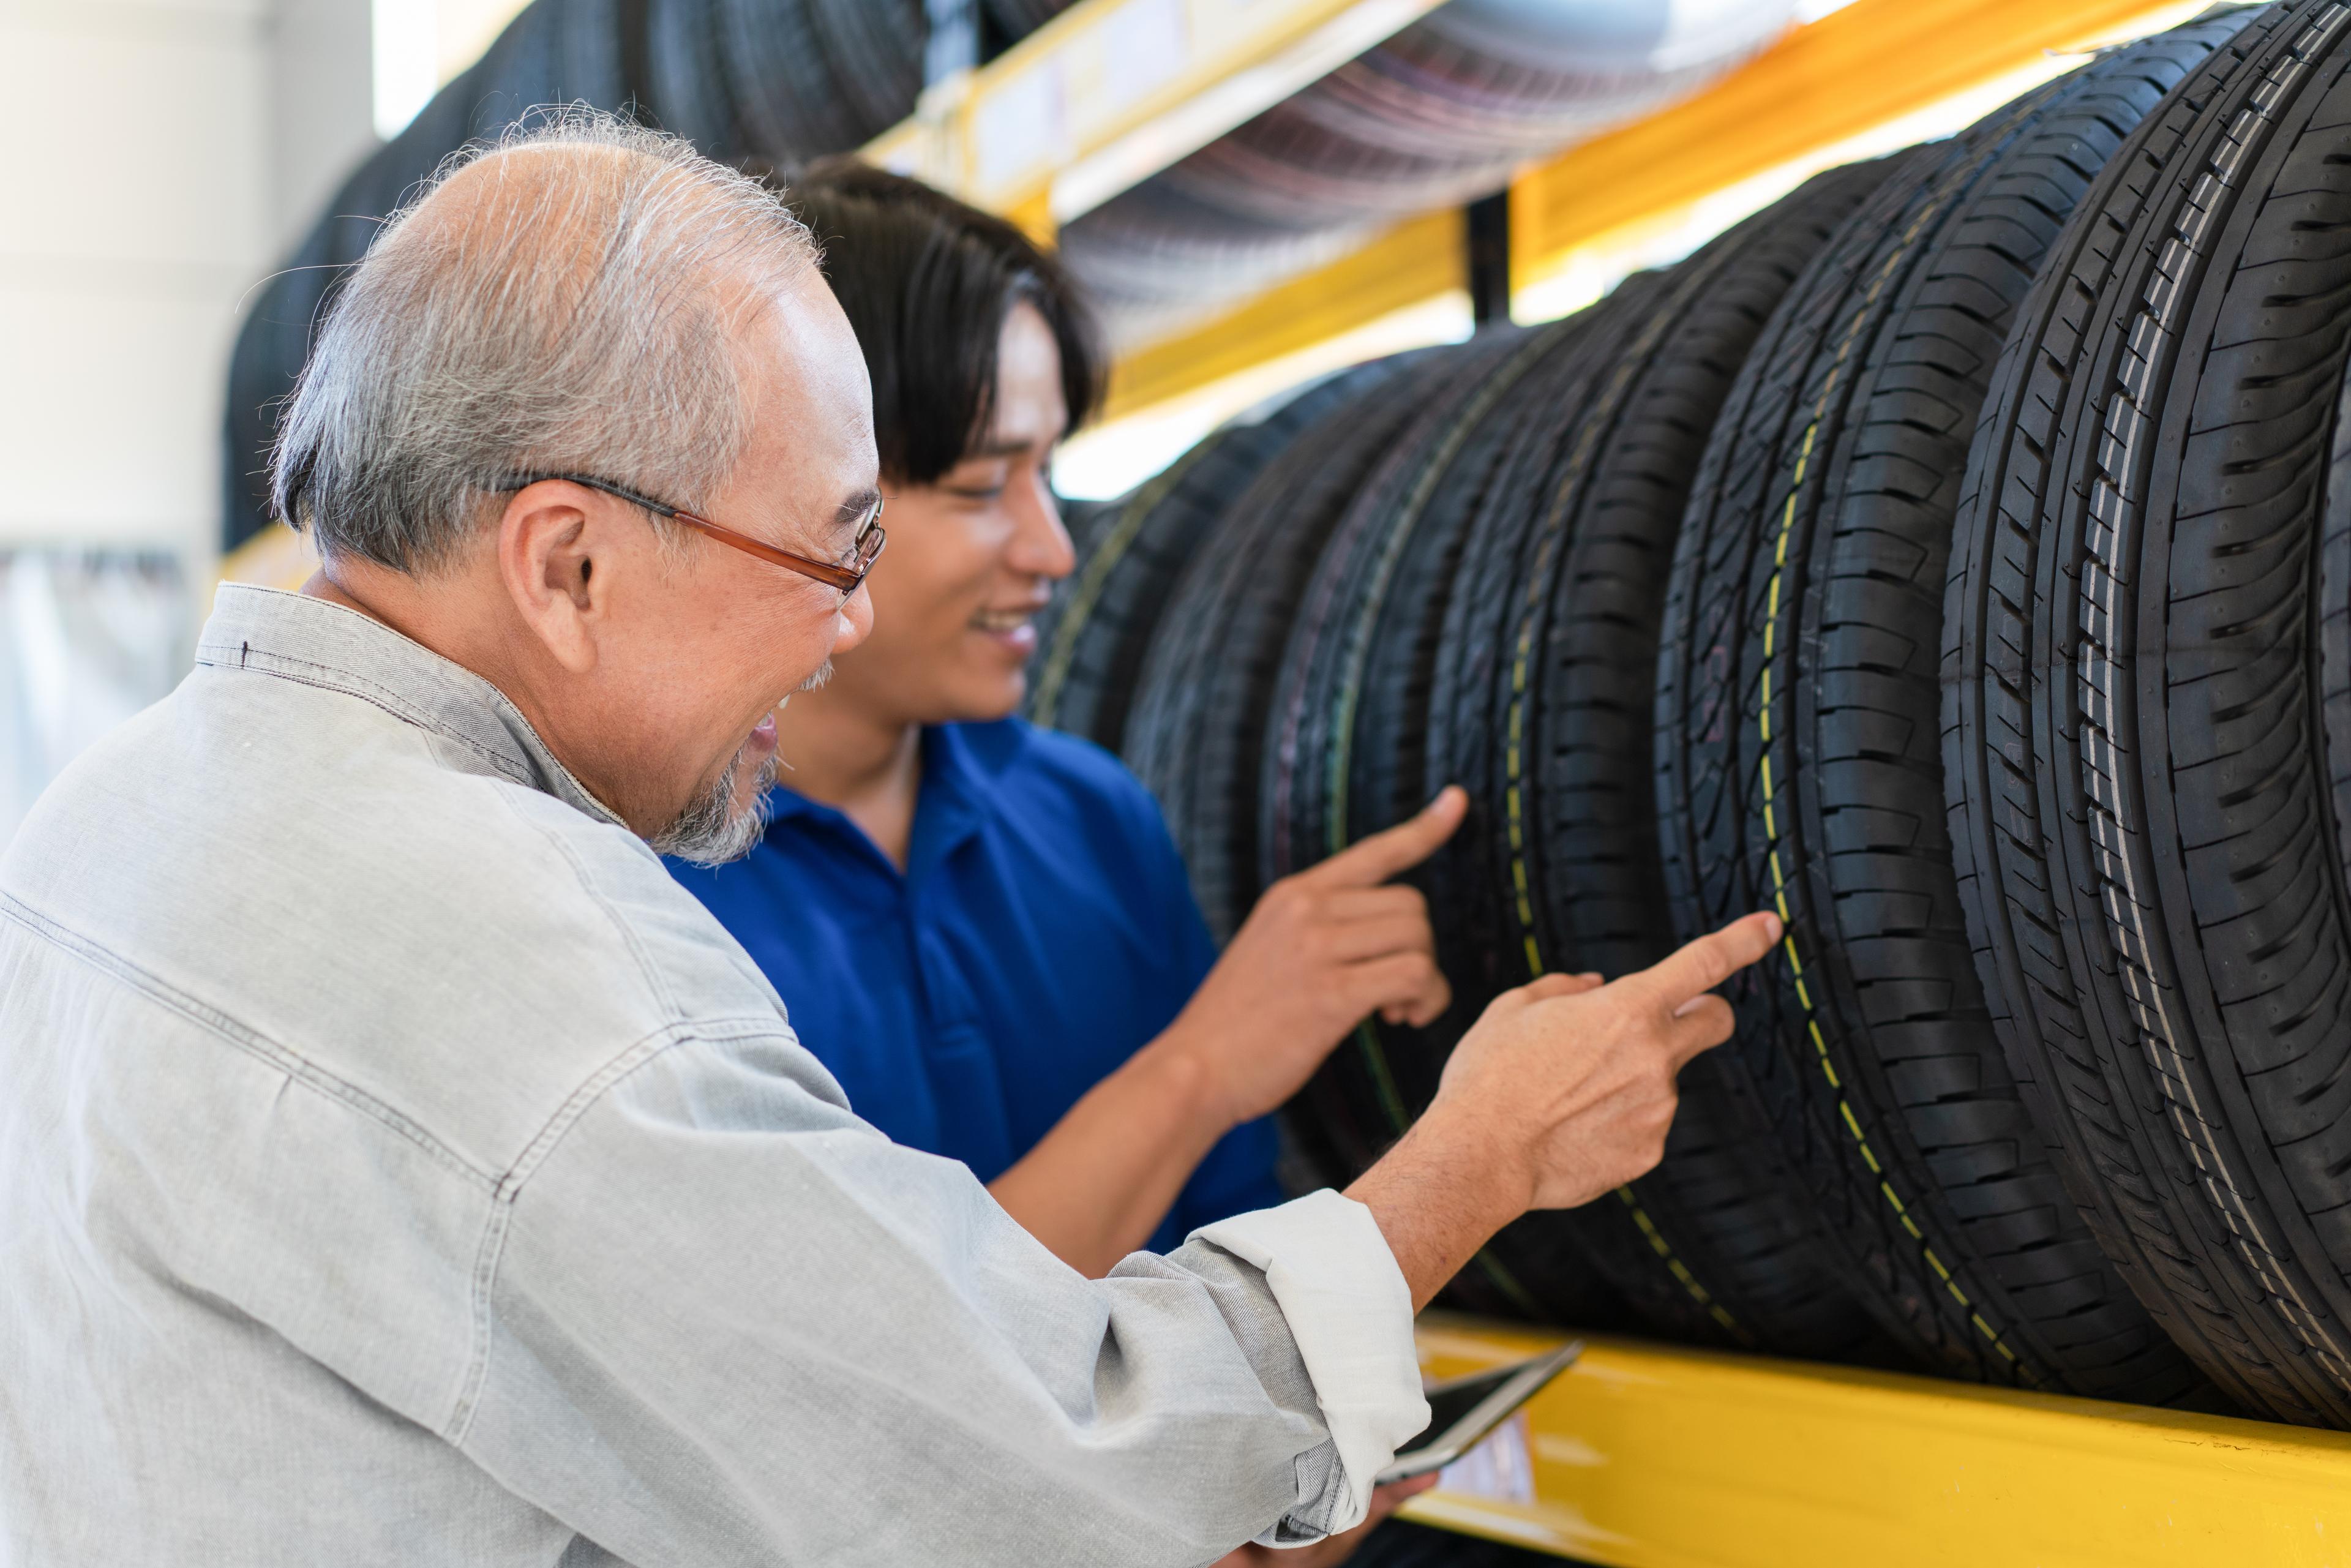 An employee showing a new potential customer their options while shopping for tires.